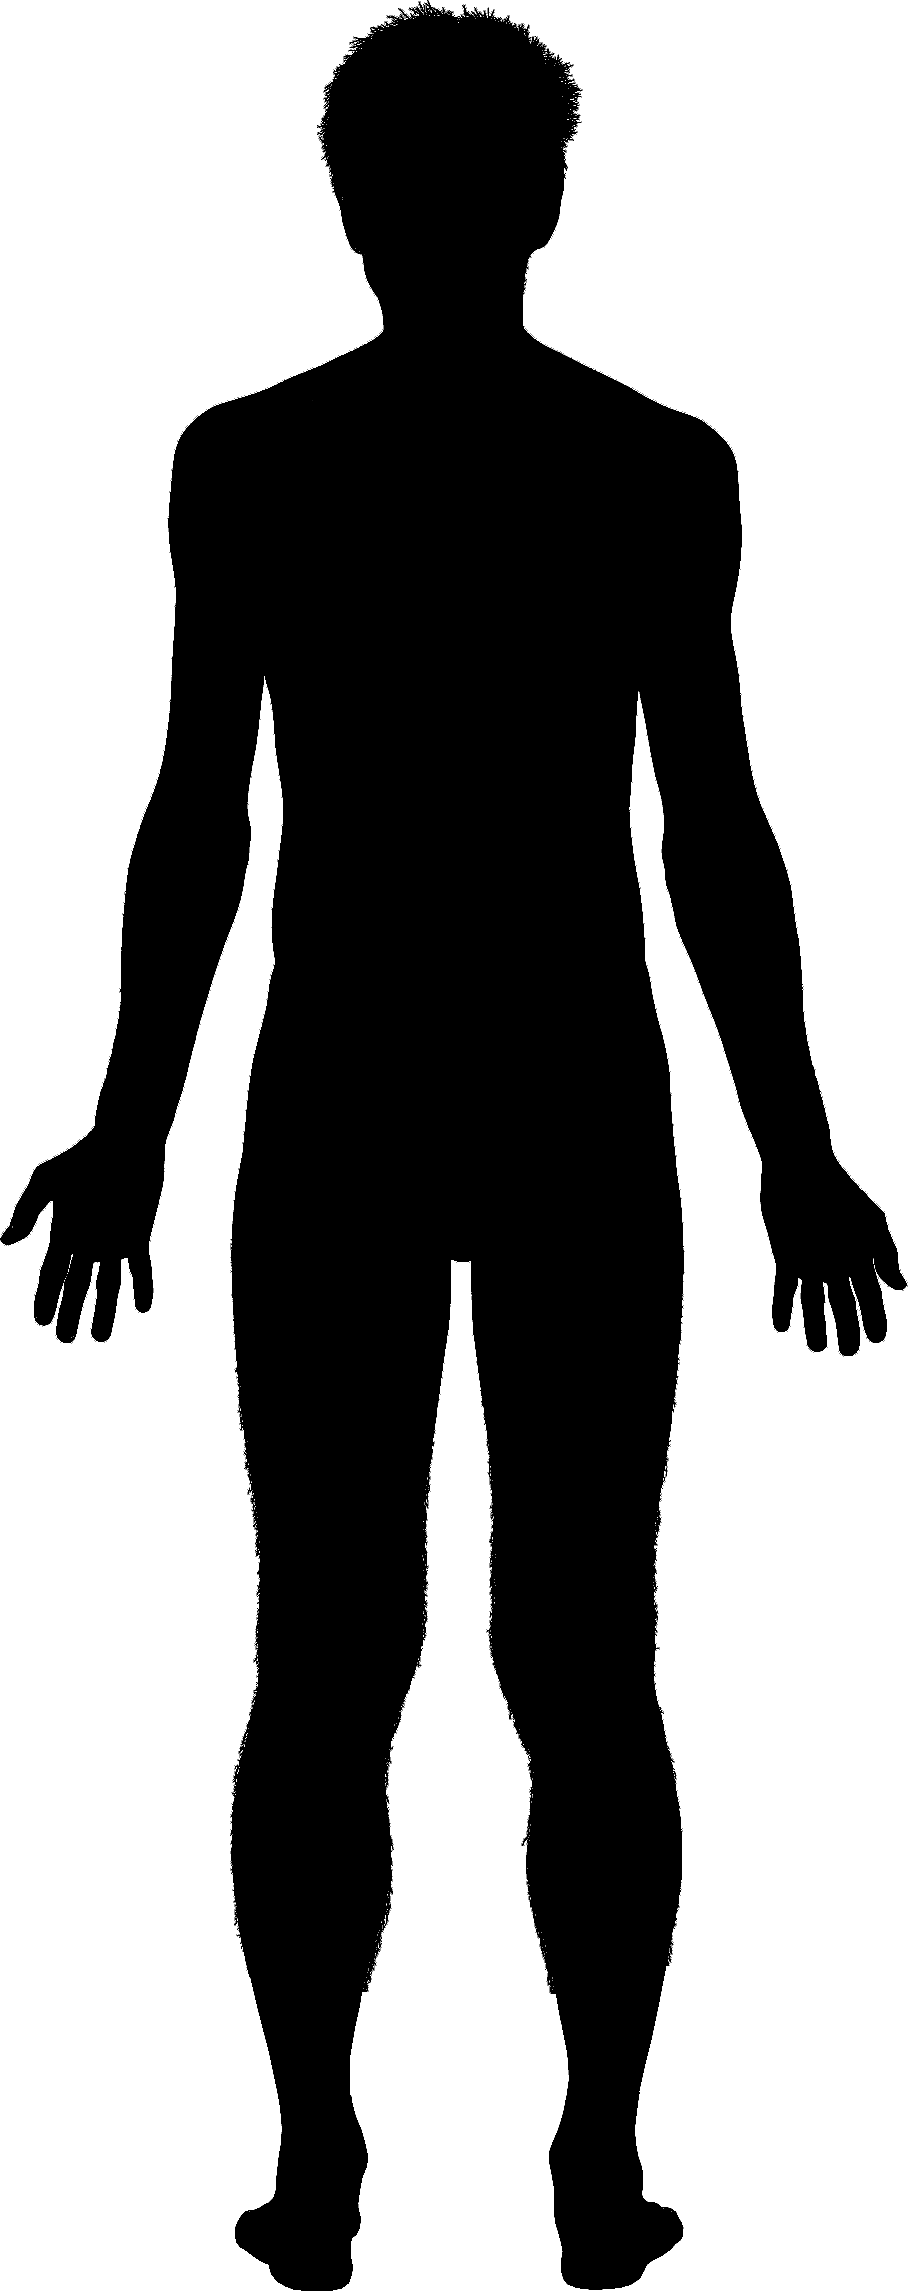 outline-of-human-body-clipart-clipart-best